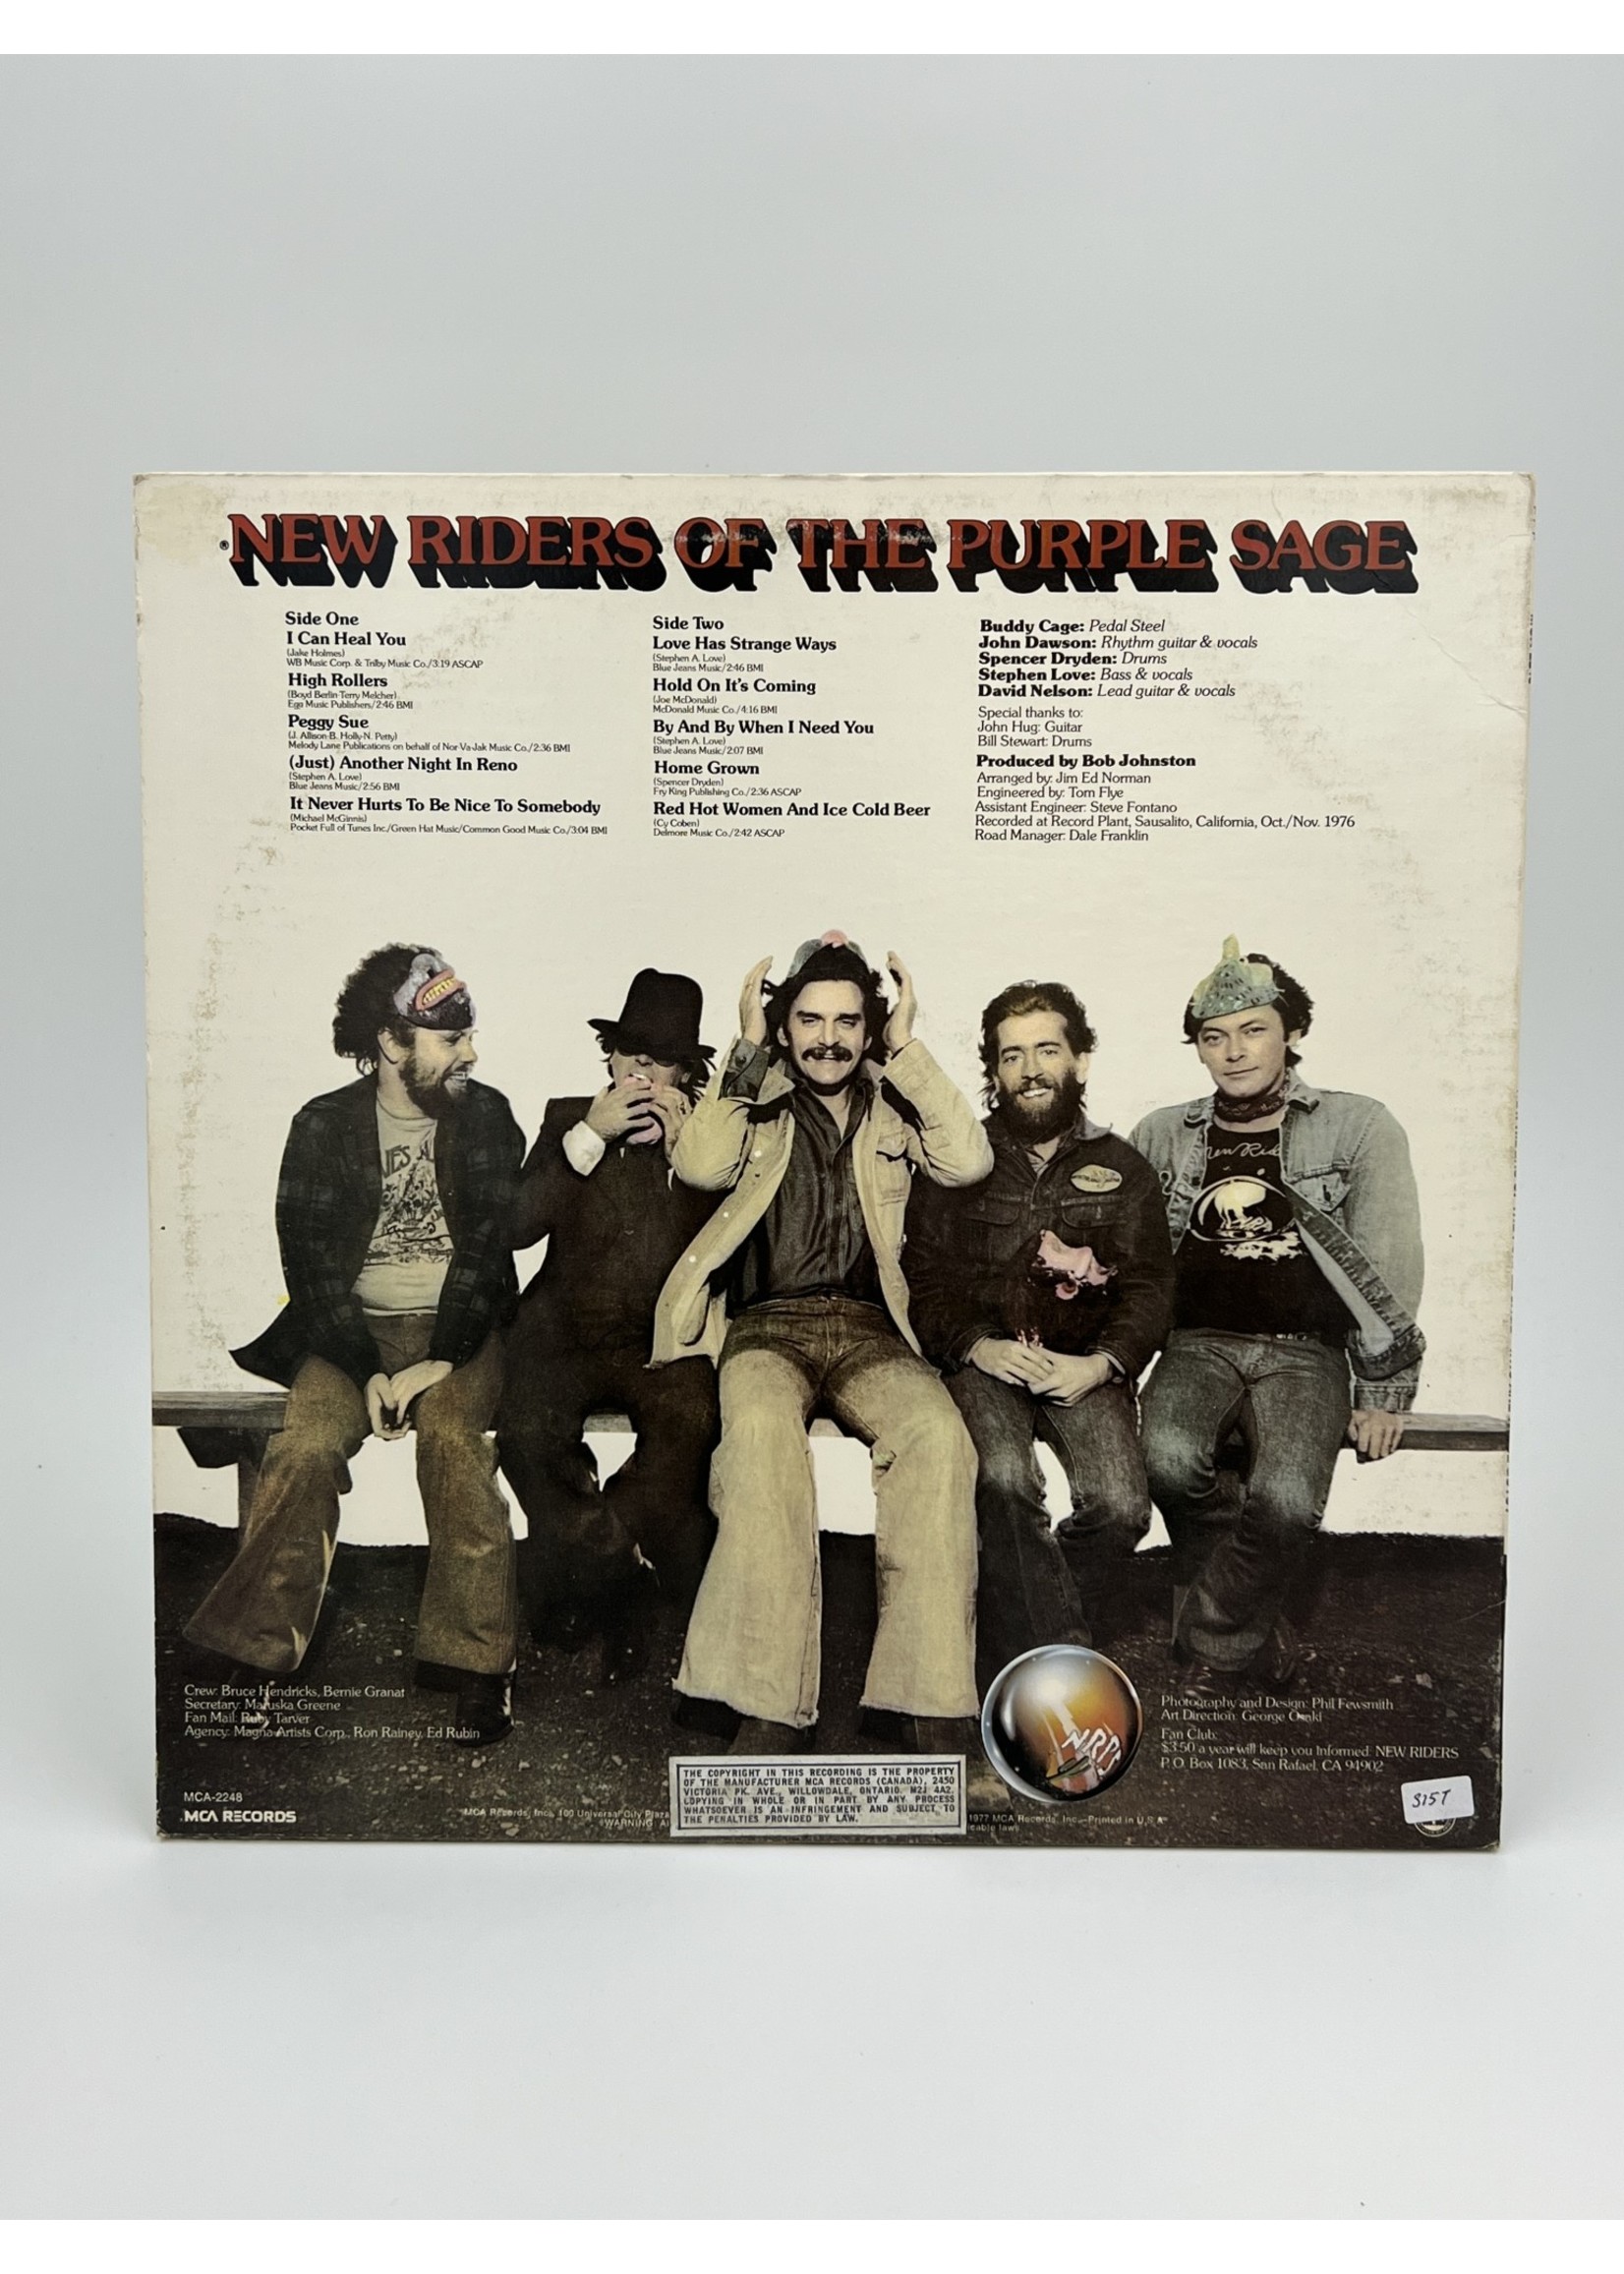 LP New Riders Of The Purple Sage Who Are Those Guys LP Record